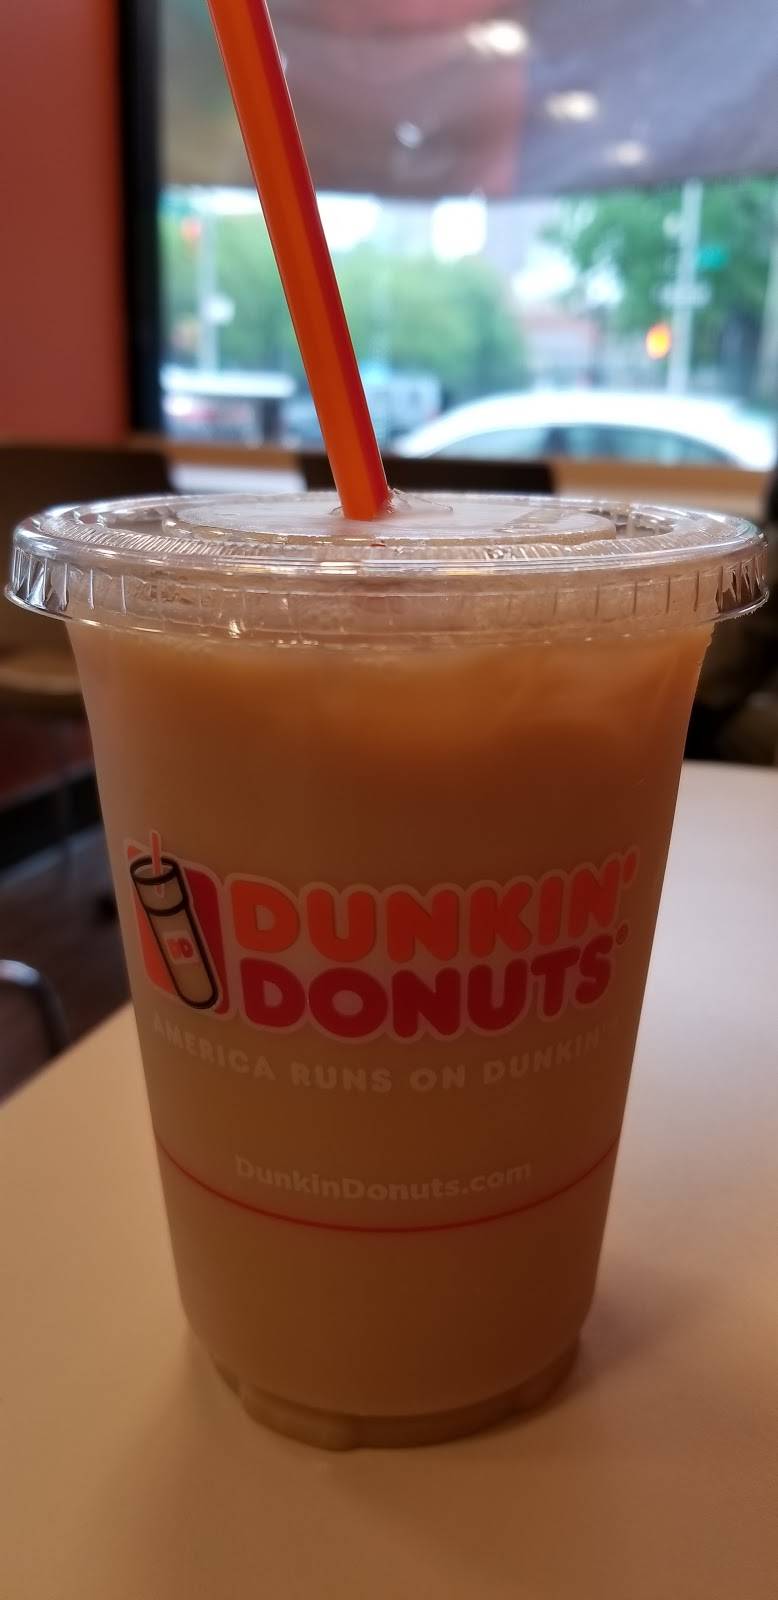 Dunkin Donuts | cafe | 1964 3rd Ave, New York, NY 10029, USA | 2123699610 OR +1 212-369-9610